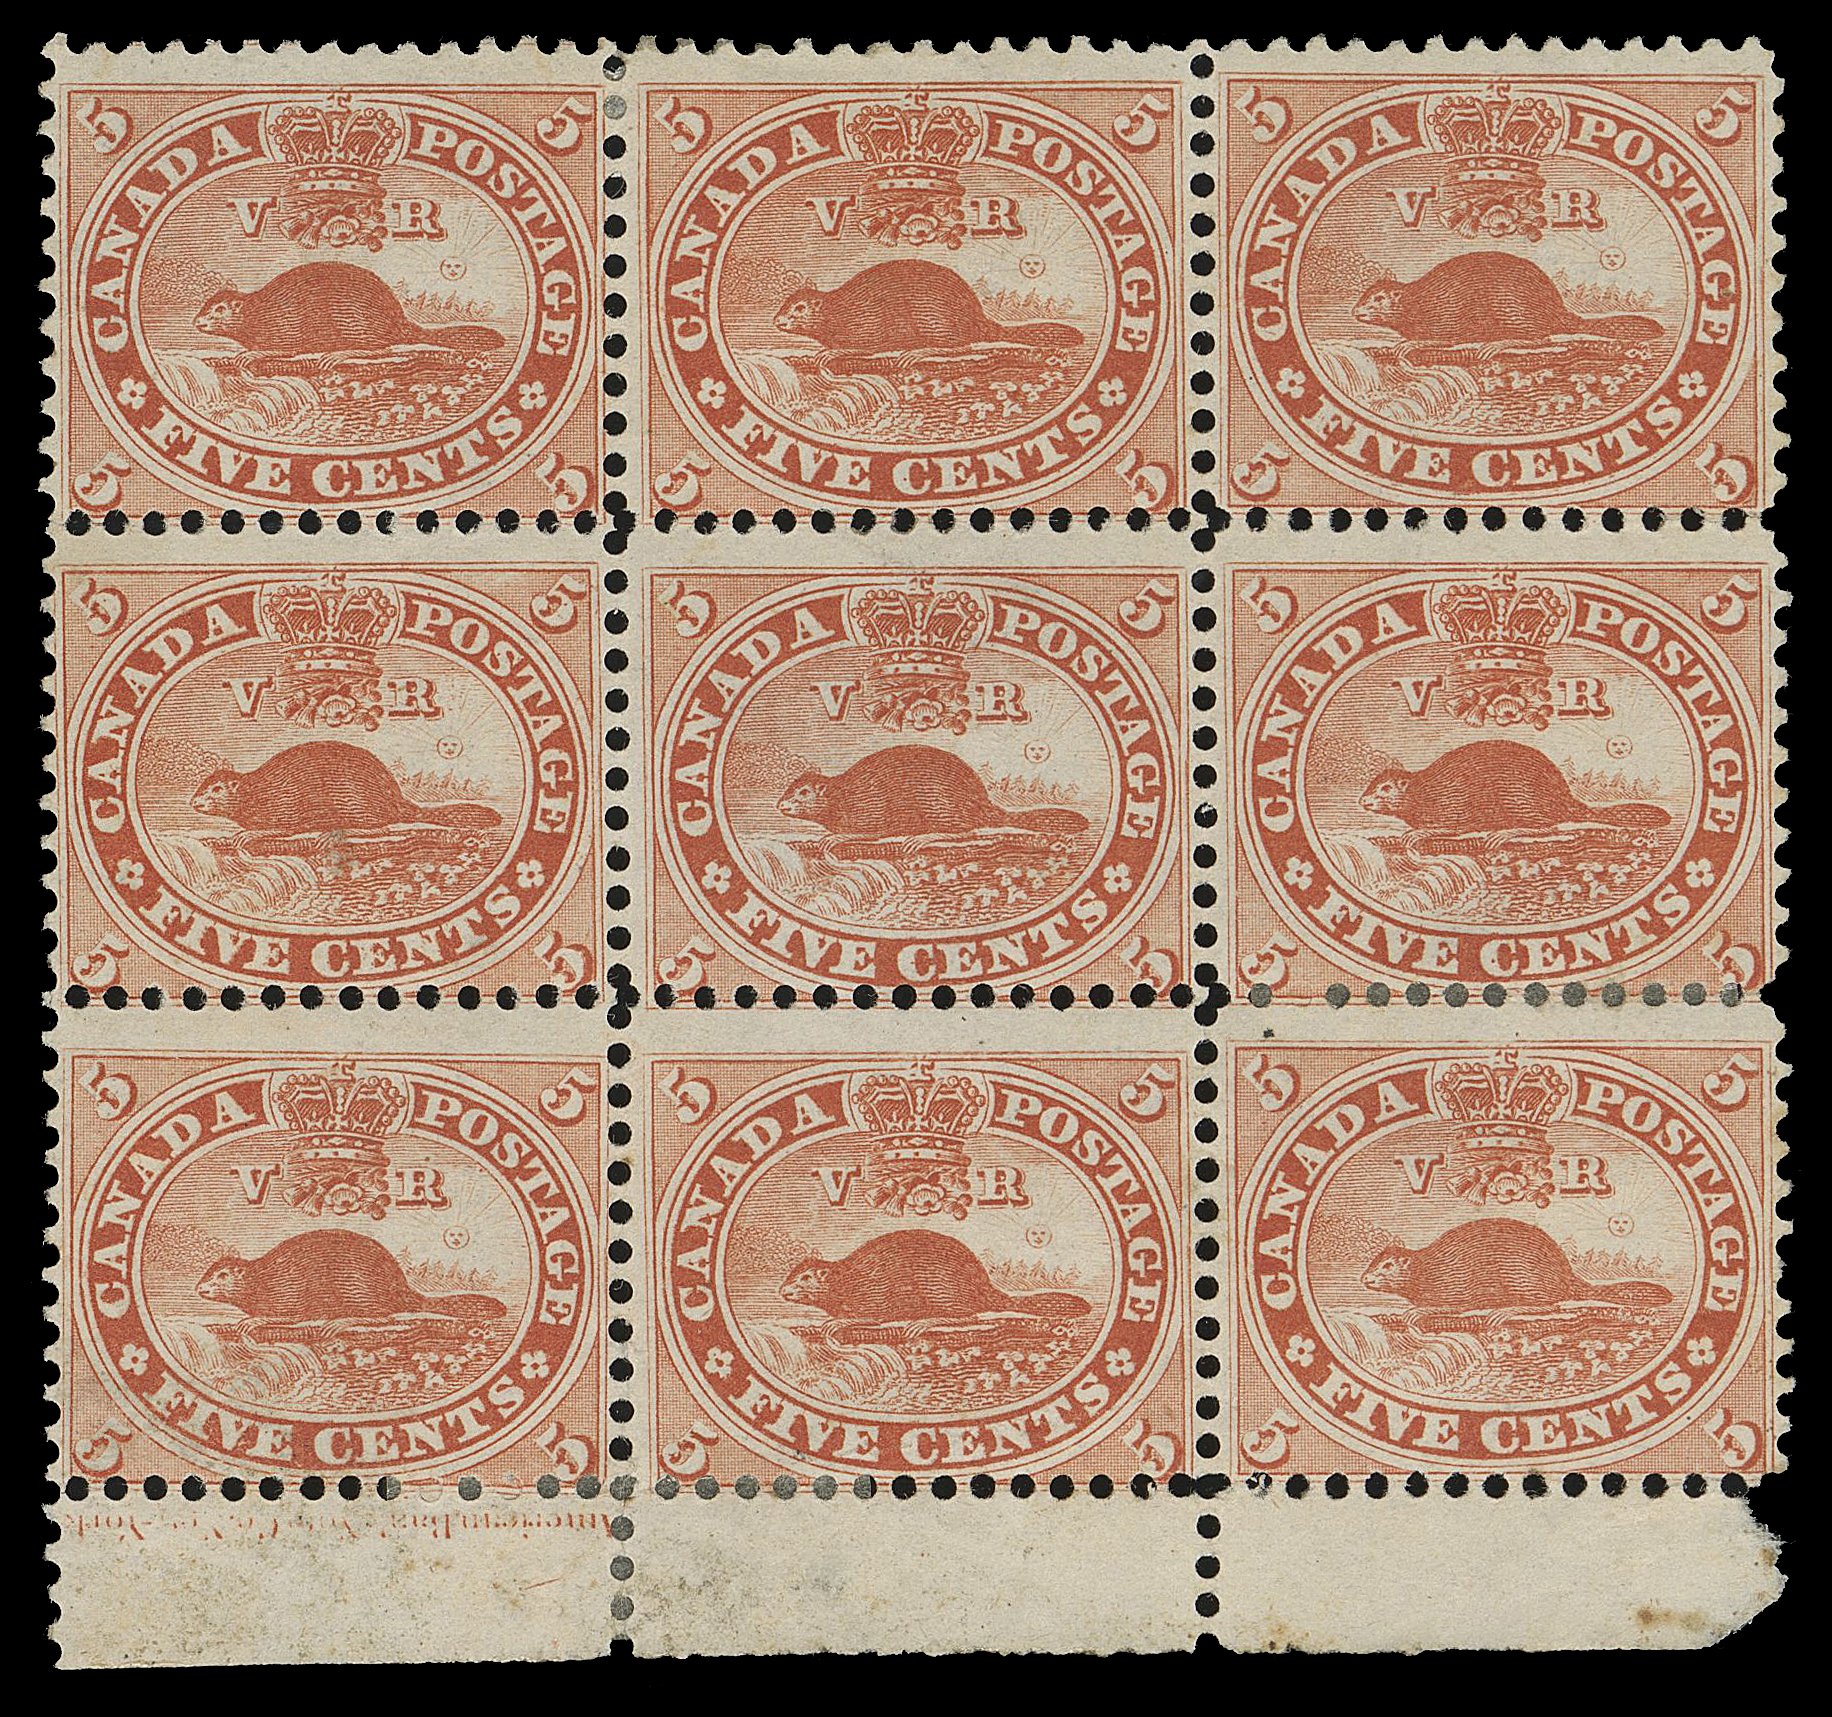 THREE PENCE AND FIVE CENTS  15,An eye-catching mint block of nine, ABNC imprint in lower margin, diagonal crease on lower right pair, marginal soiling and small fault at lower right, the other seven stamps in sound condition; FULL ORIGINAL GUM hinged or lightly hinged on six stamps and NEVER HINGED on three - the left pair of the centre row and top right stamp. A very rare and impressive large multiple of this popular classic stamp.

This block originates from State 8 of the plate (Positions 73-75 / 93-95) with known Re-entries shown at Positions 75 & 83.

Provenance: Dale-Lichtenstein, Sale 10 - Canada, H.R. Harmer, Inc., December 1970; Lot 355
Fred Goodhelpsen Collection (private sale)
Arthur Groten, Maresch Sale 132, September 1981; Lot 148
Sam Nickle, Christie